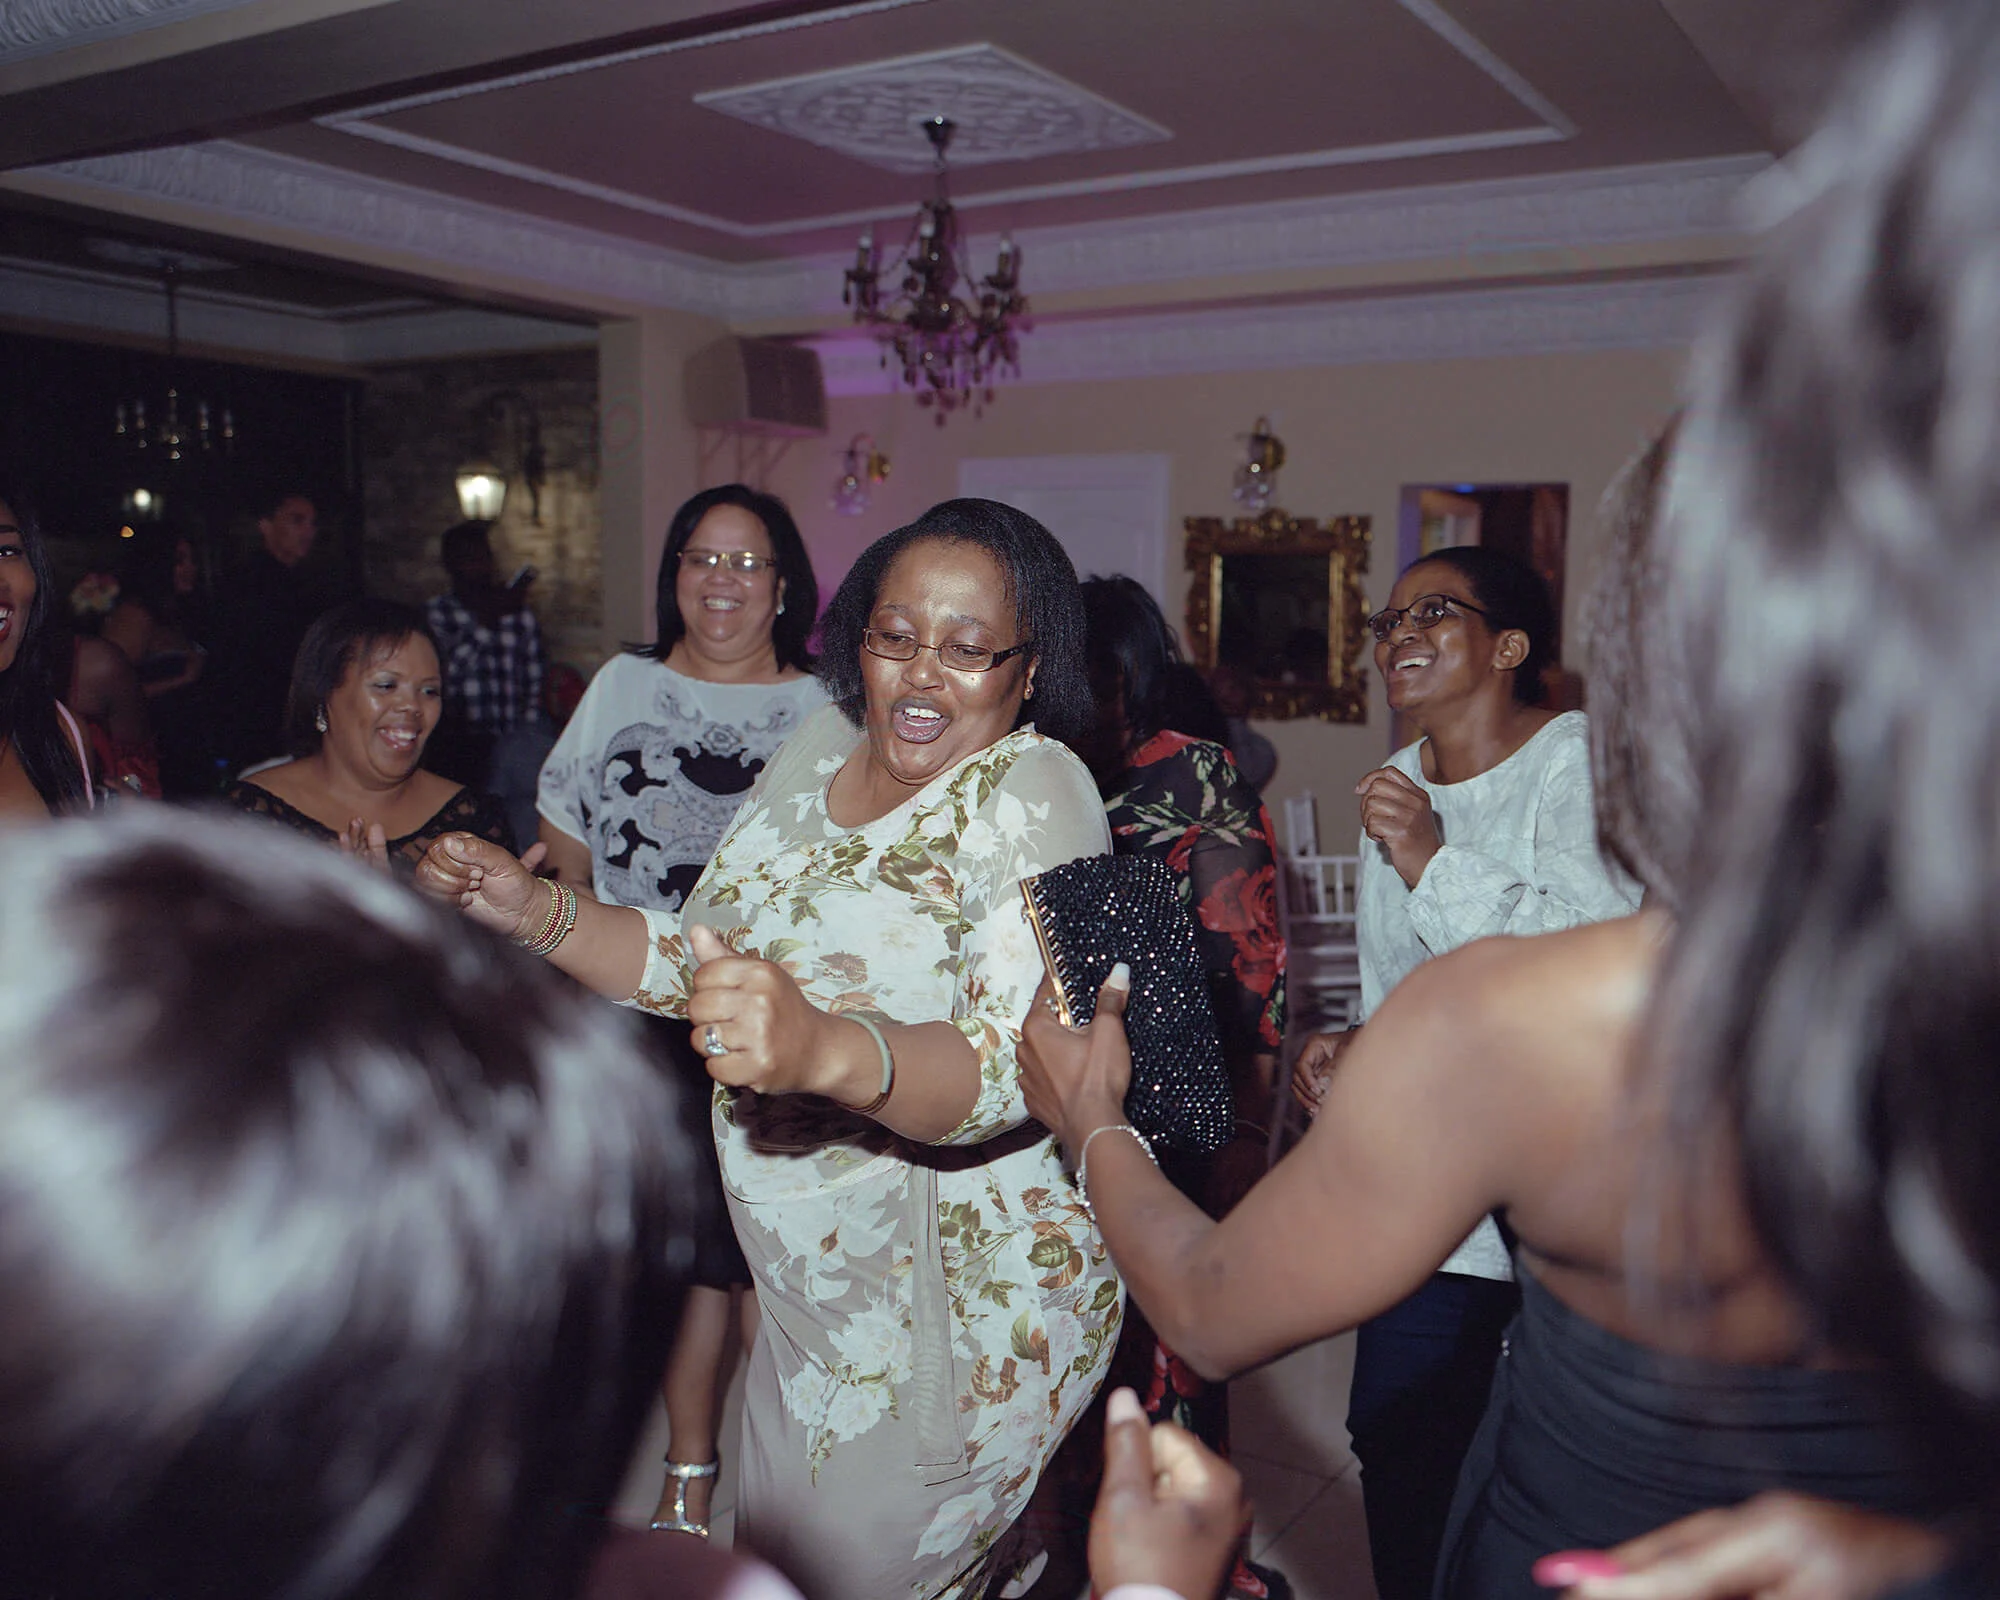 Everyone got involved in the festivities once the dancing started. The teachers and students mingle, surrounding teacher Zadile Dweba.